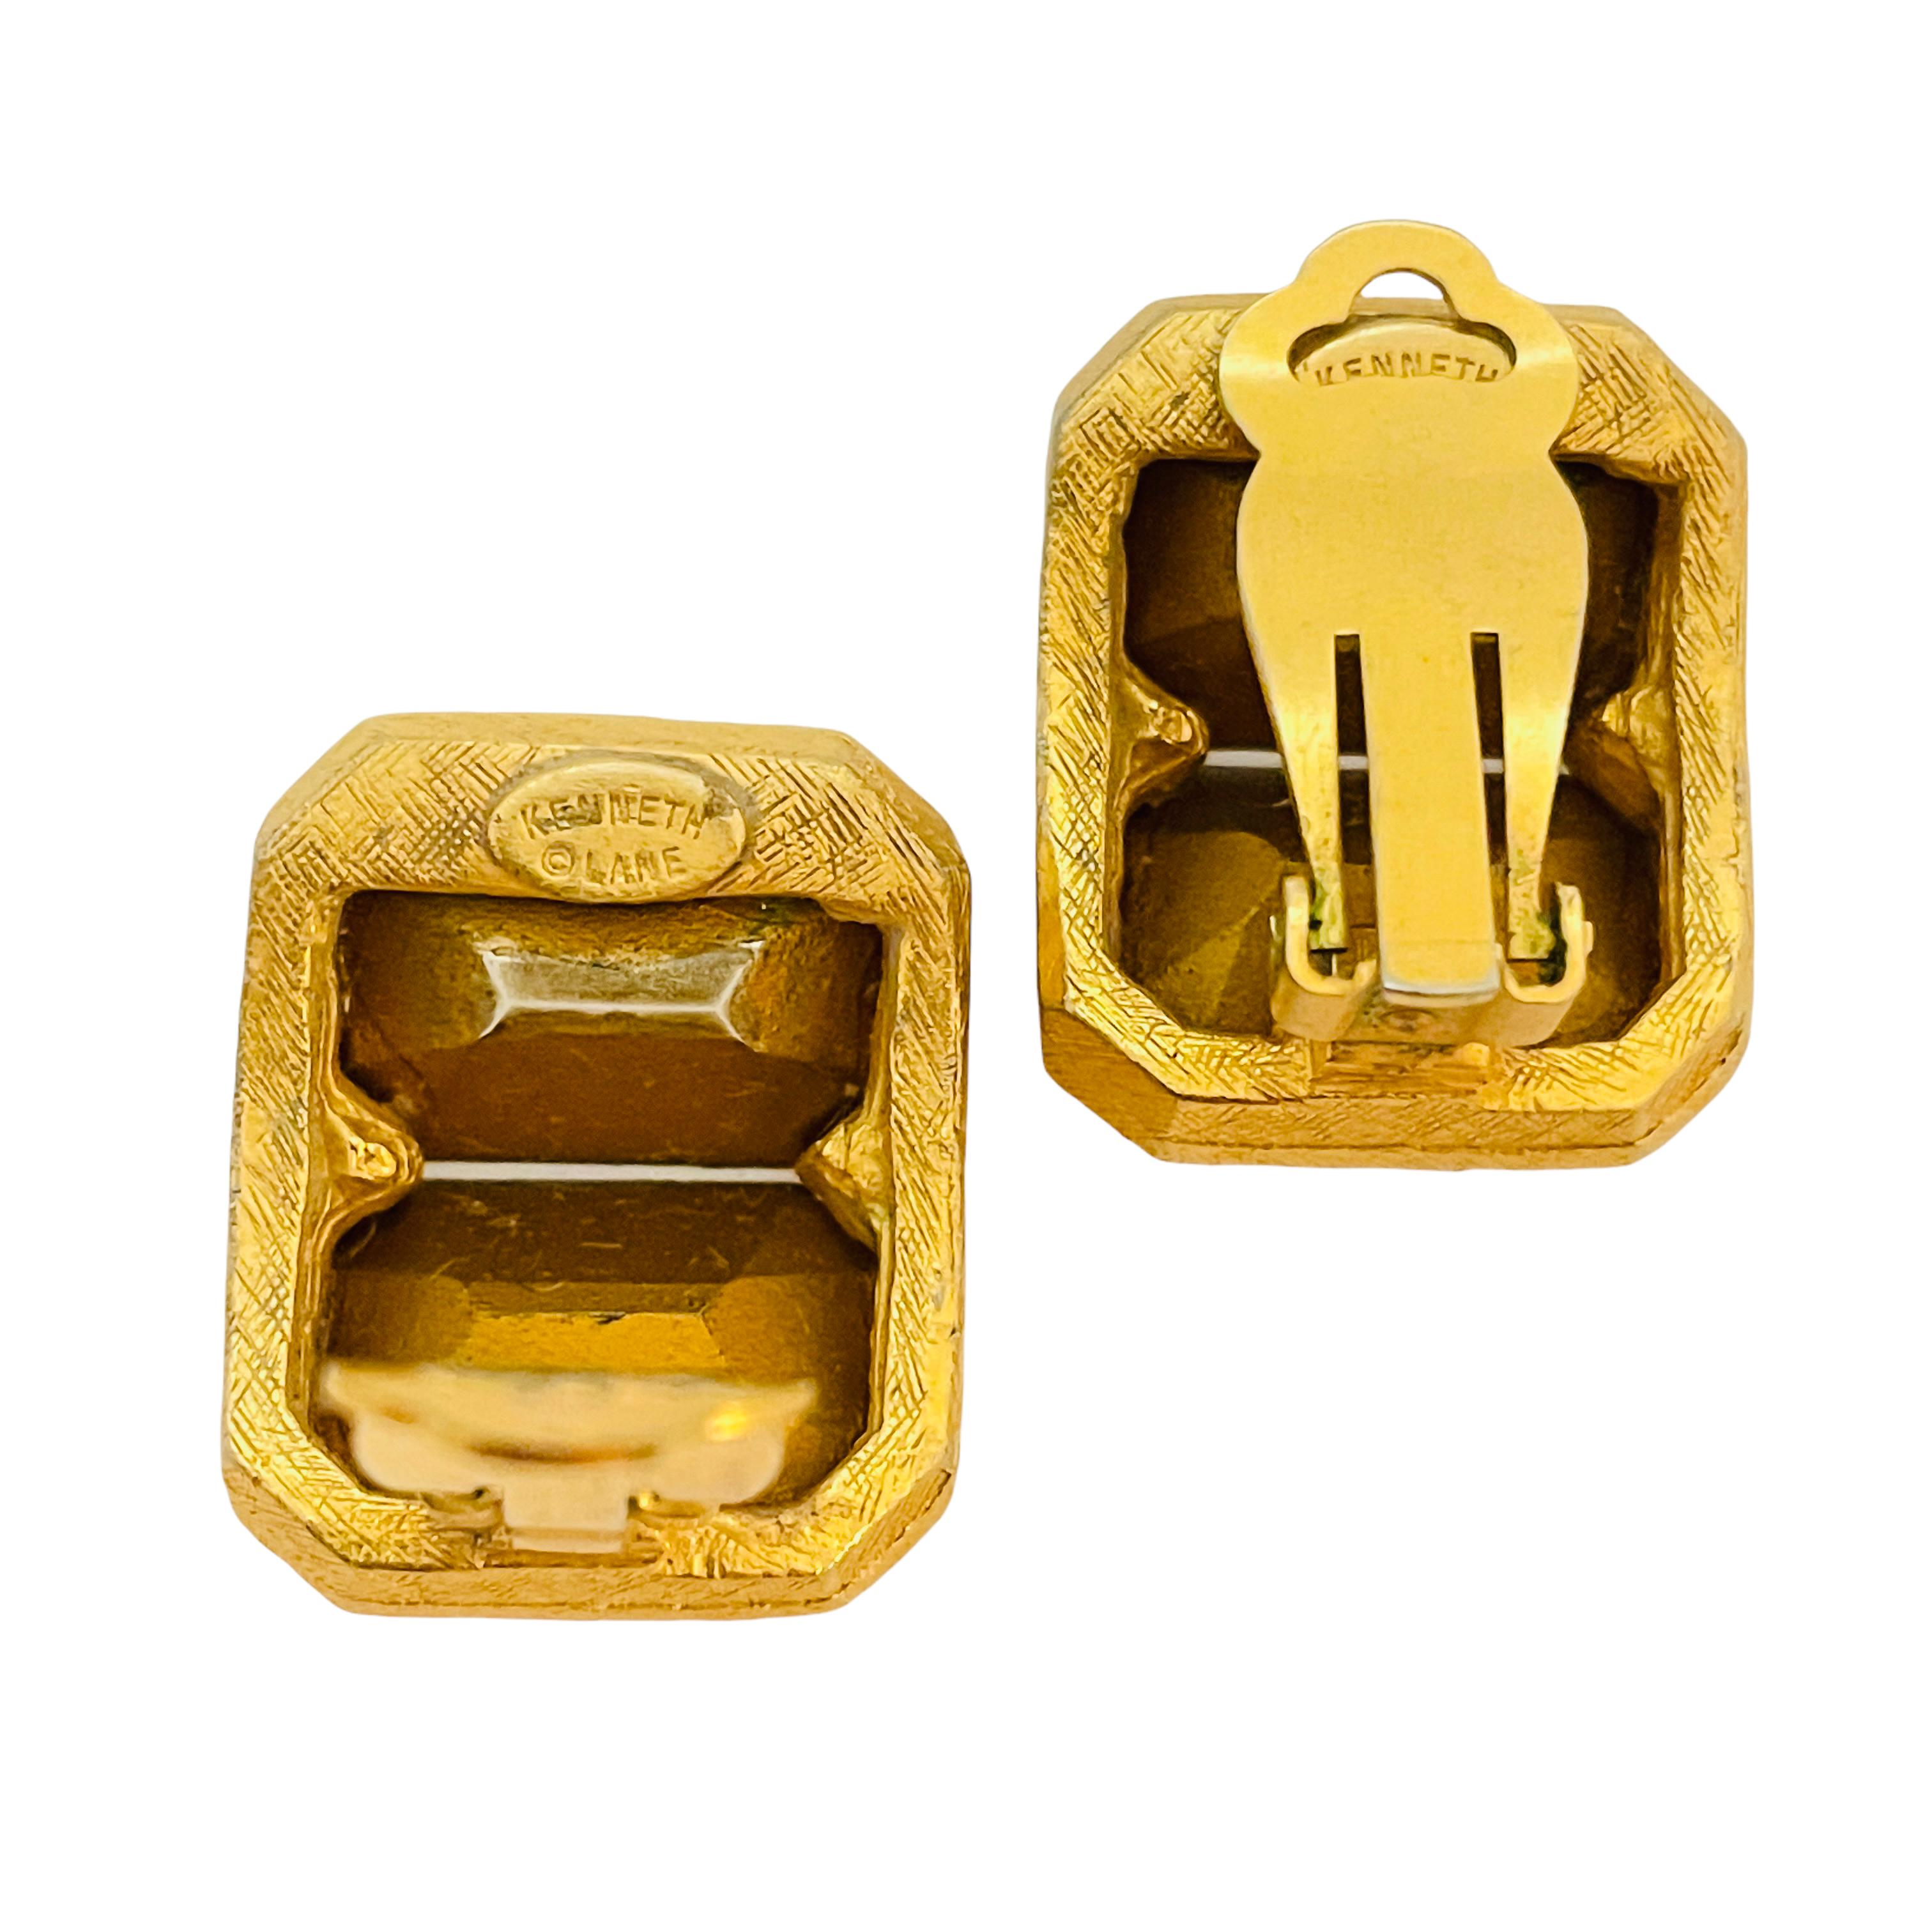 Vintage KENNETH LANE gold glass designer runway clip on earrings In Good Condition For Sale In Palos Hills, IL